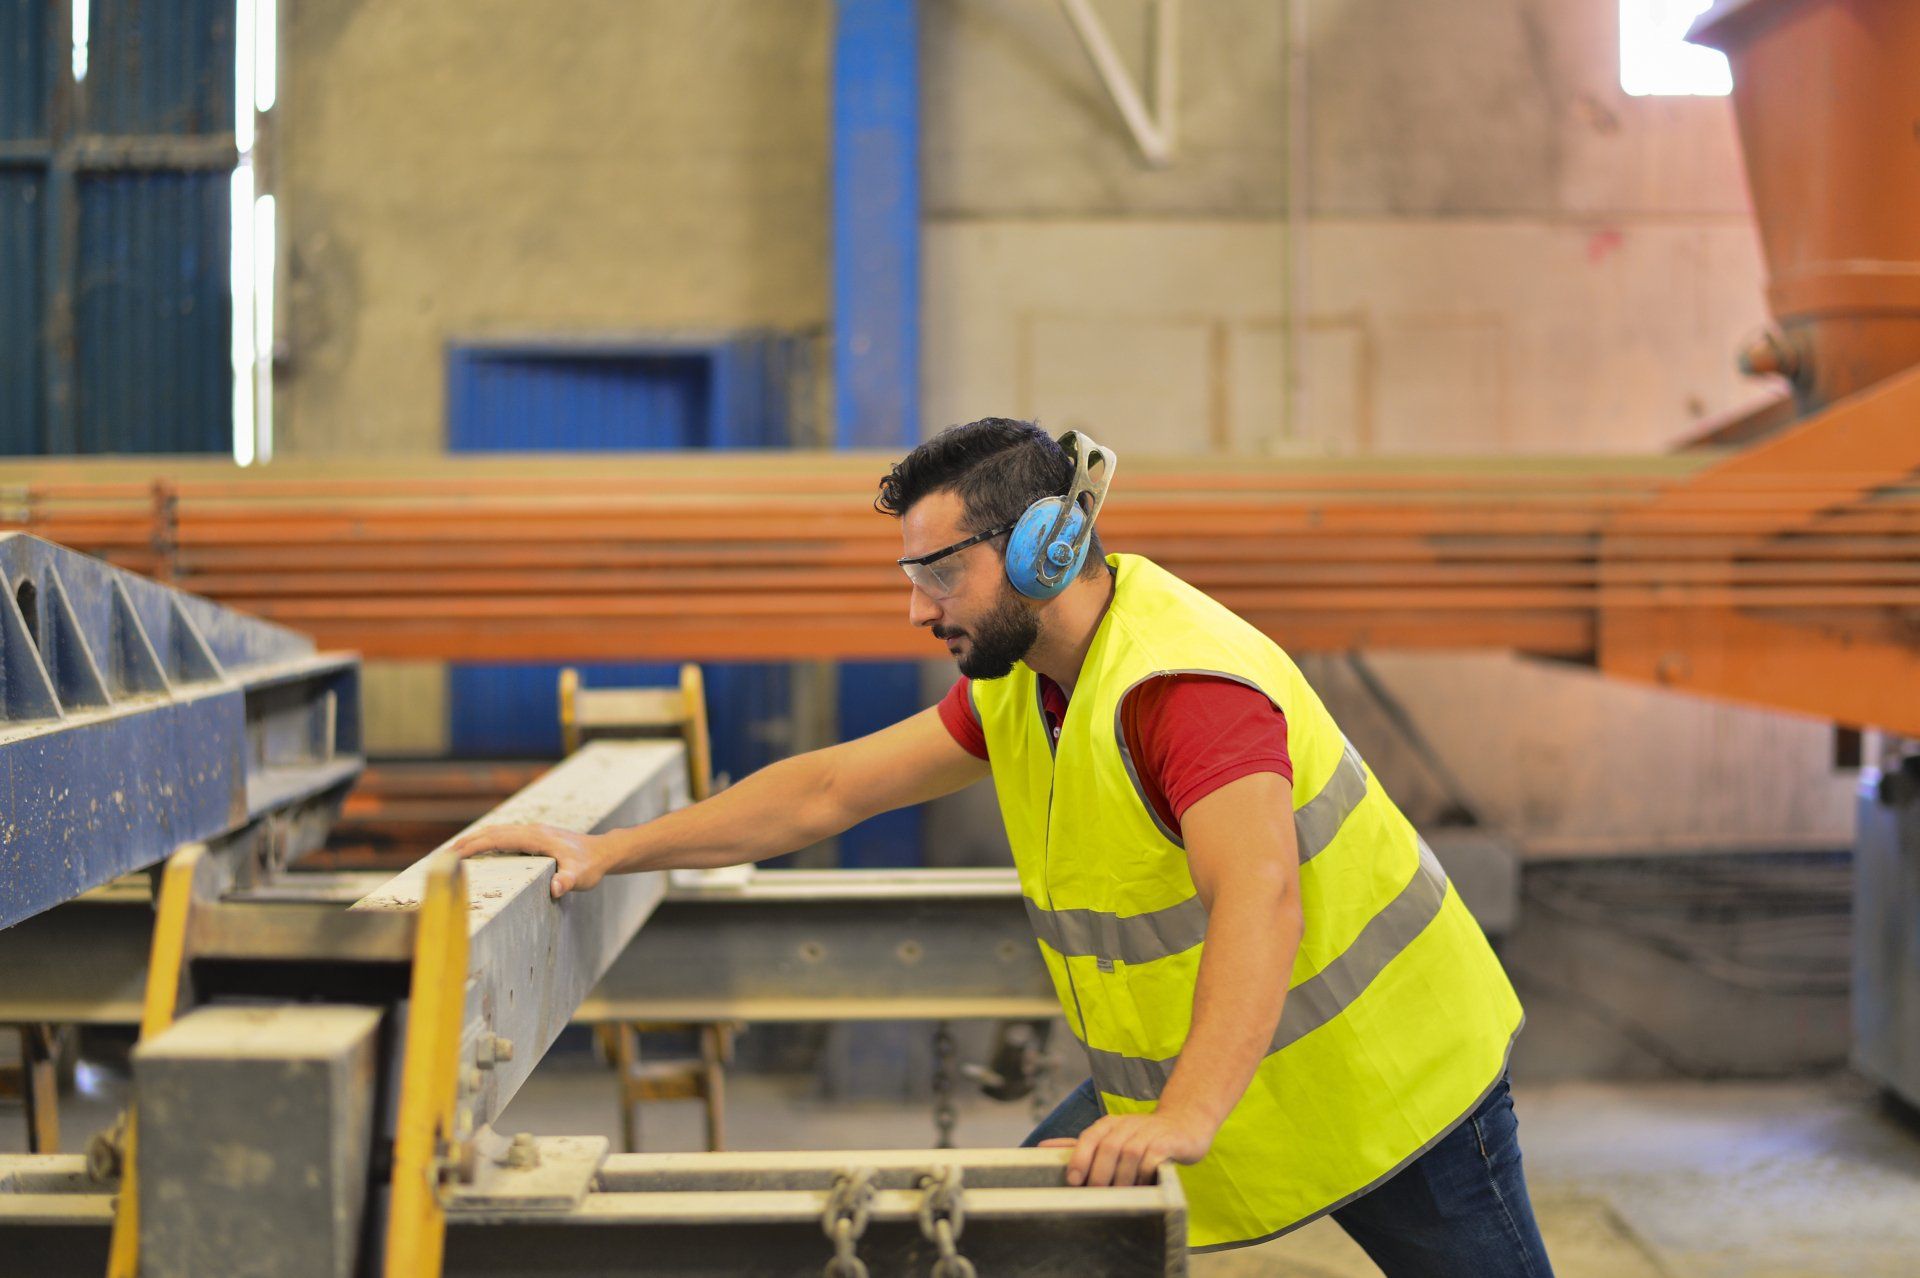 worker wearing hearing protection